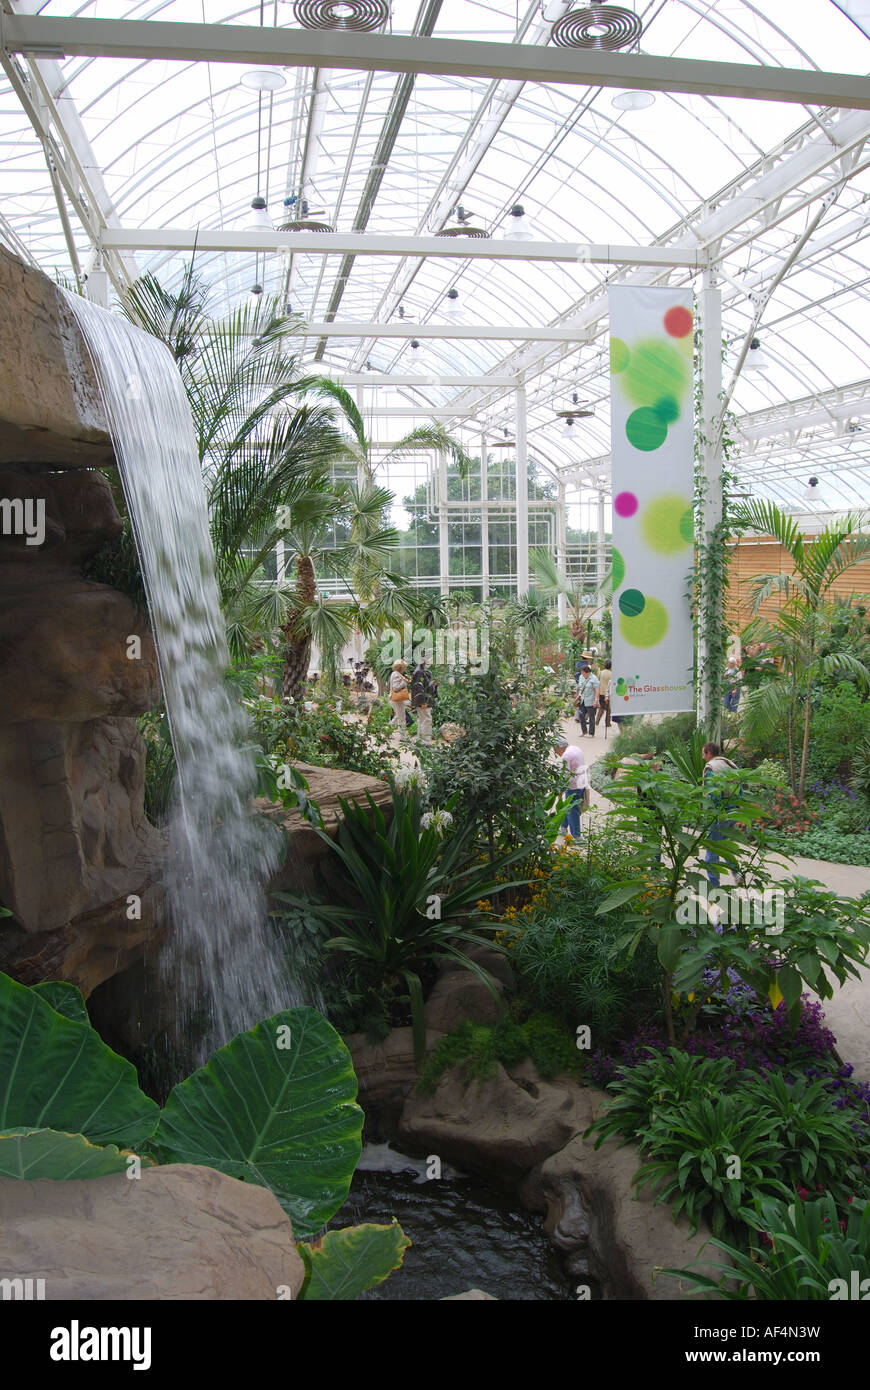 Indoor plants and waterfall, The Glasshouse, RHS Wisley Gardens, Woking, Surrey, England, United Kingdom Stock Photo